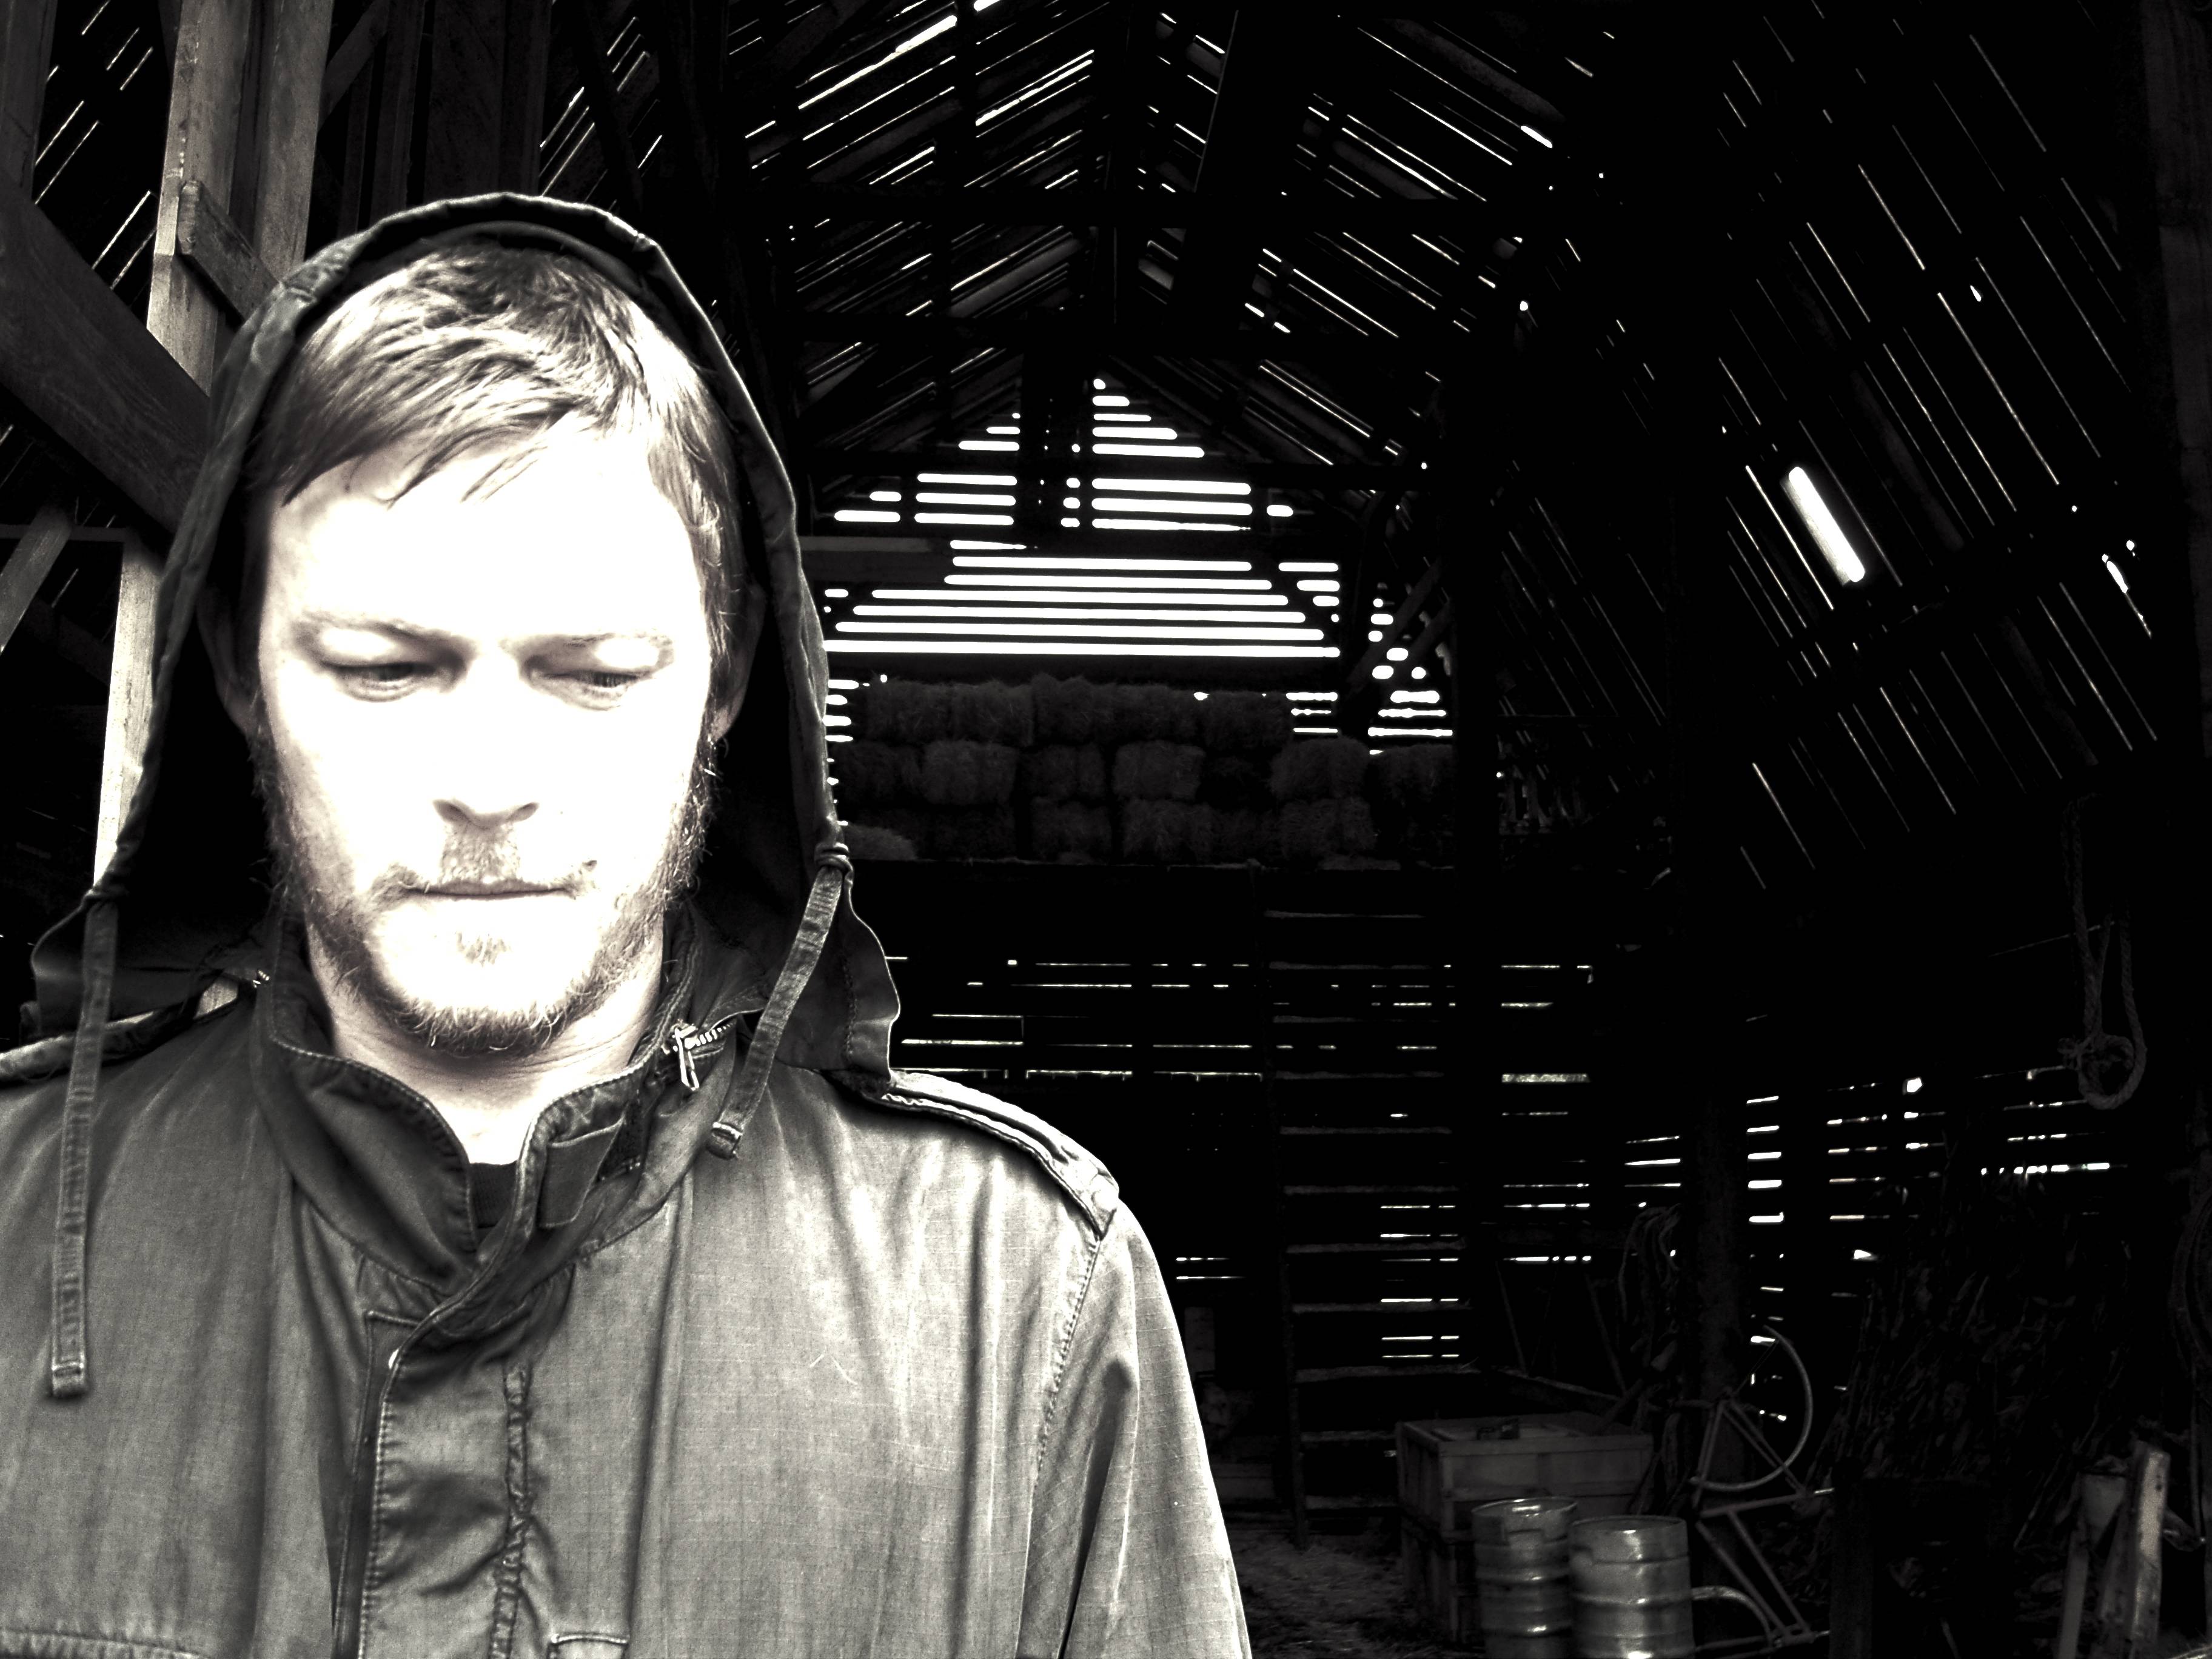 Norman Reedus Wallpaper High Resolution And Quality